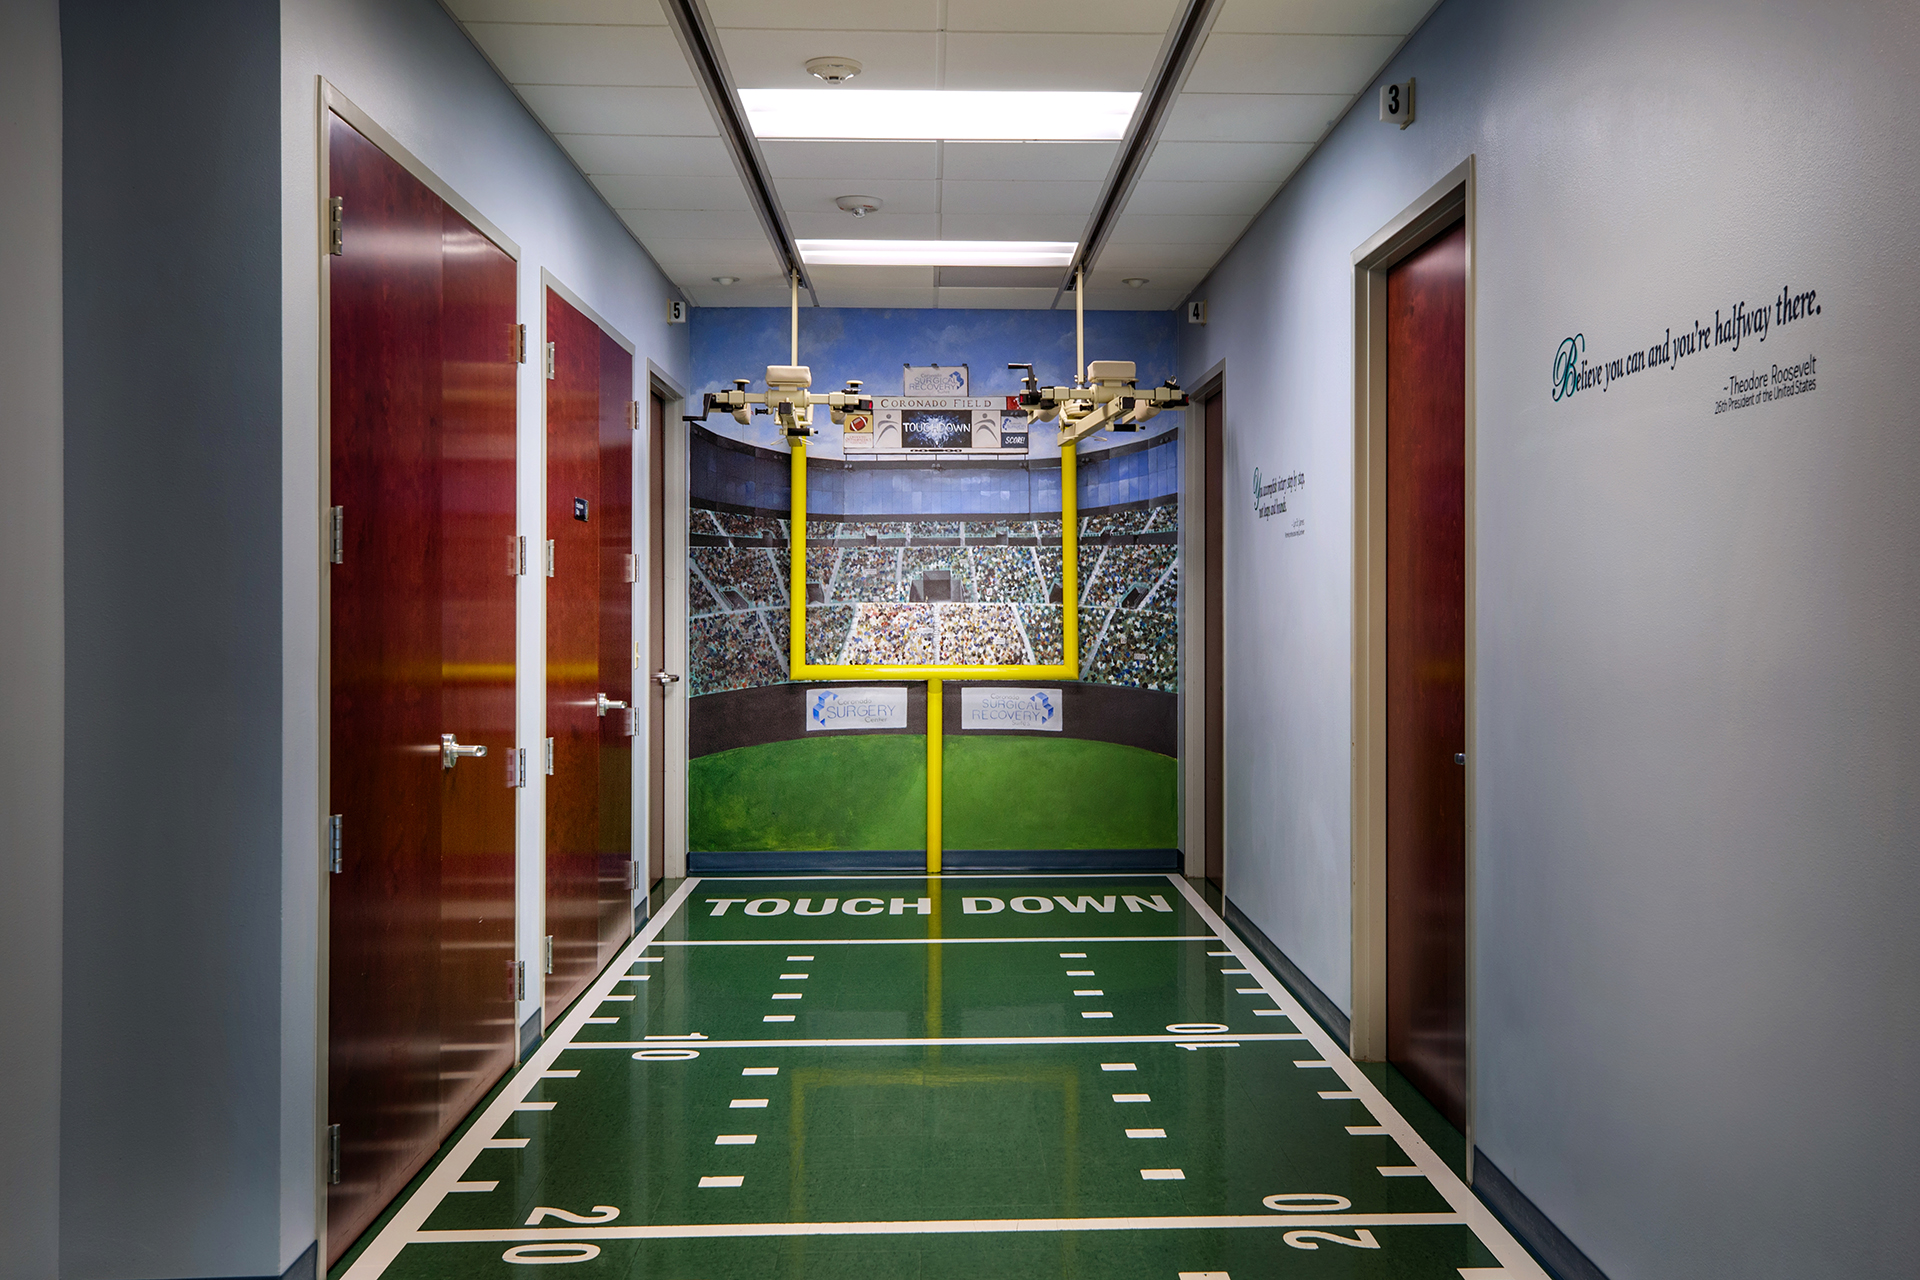 Football-themed decor in the lobby of the after-surgery recovery area at Crovetti Orthopaedics